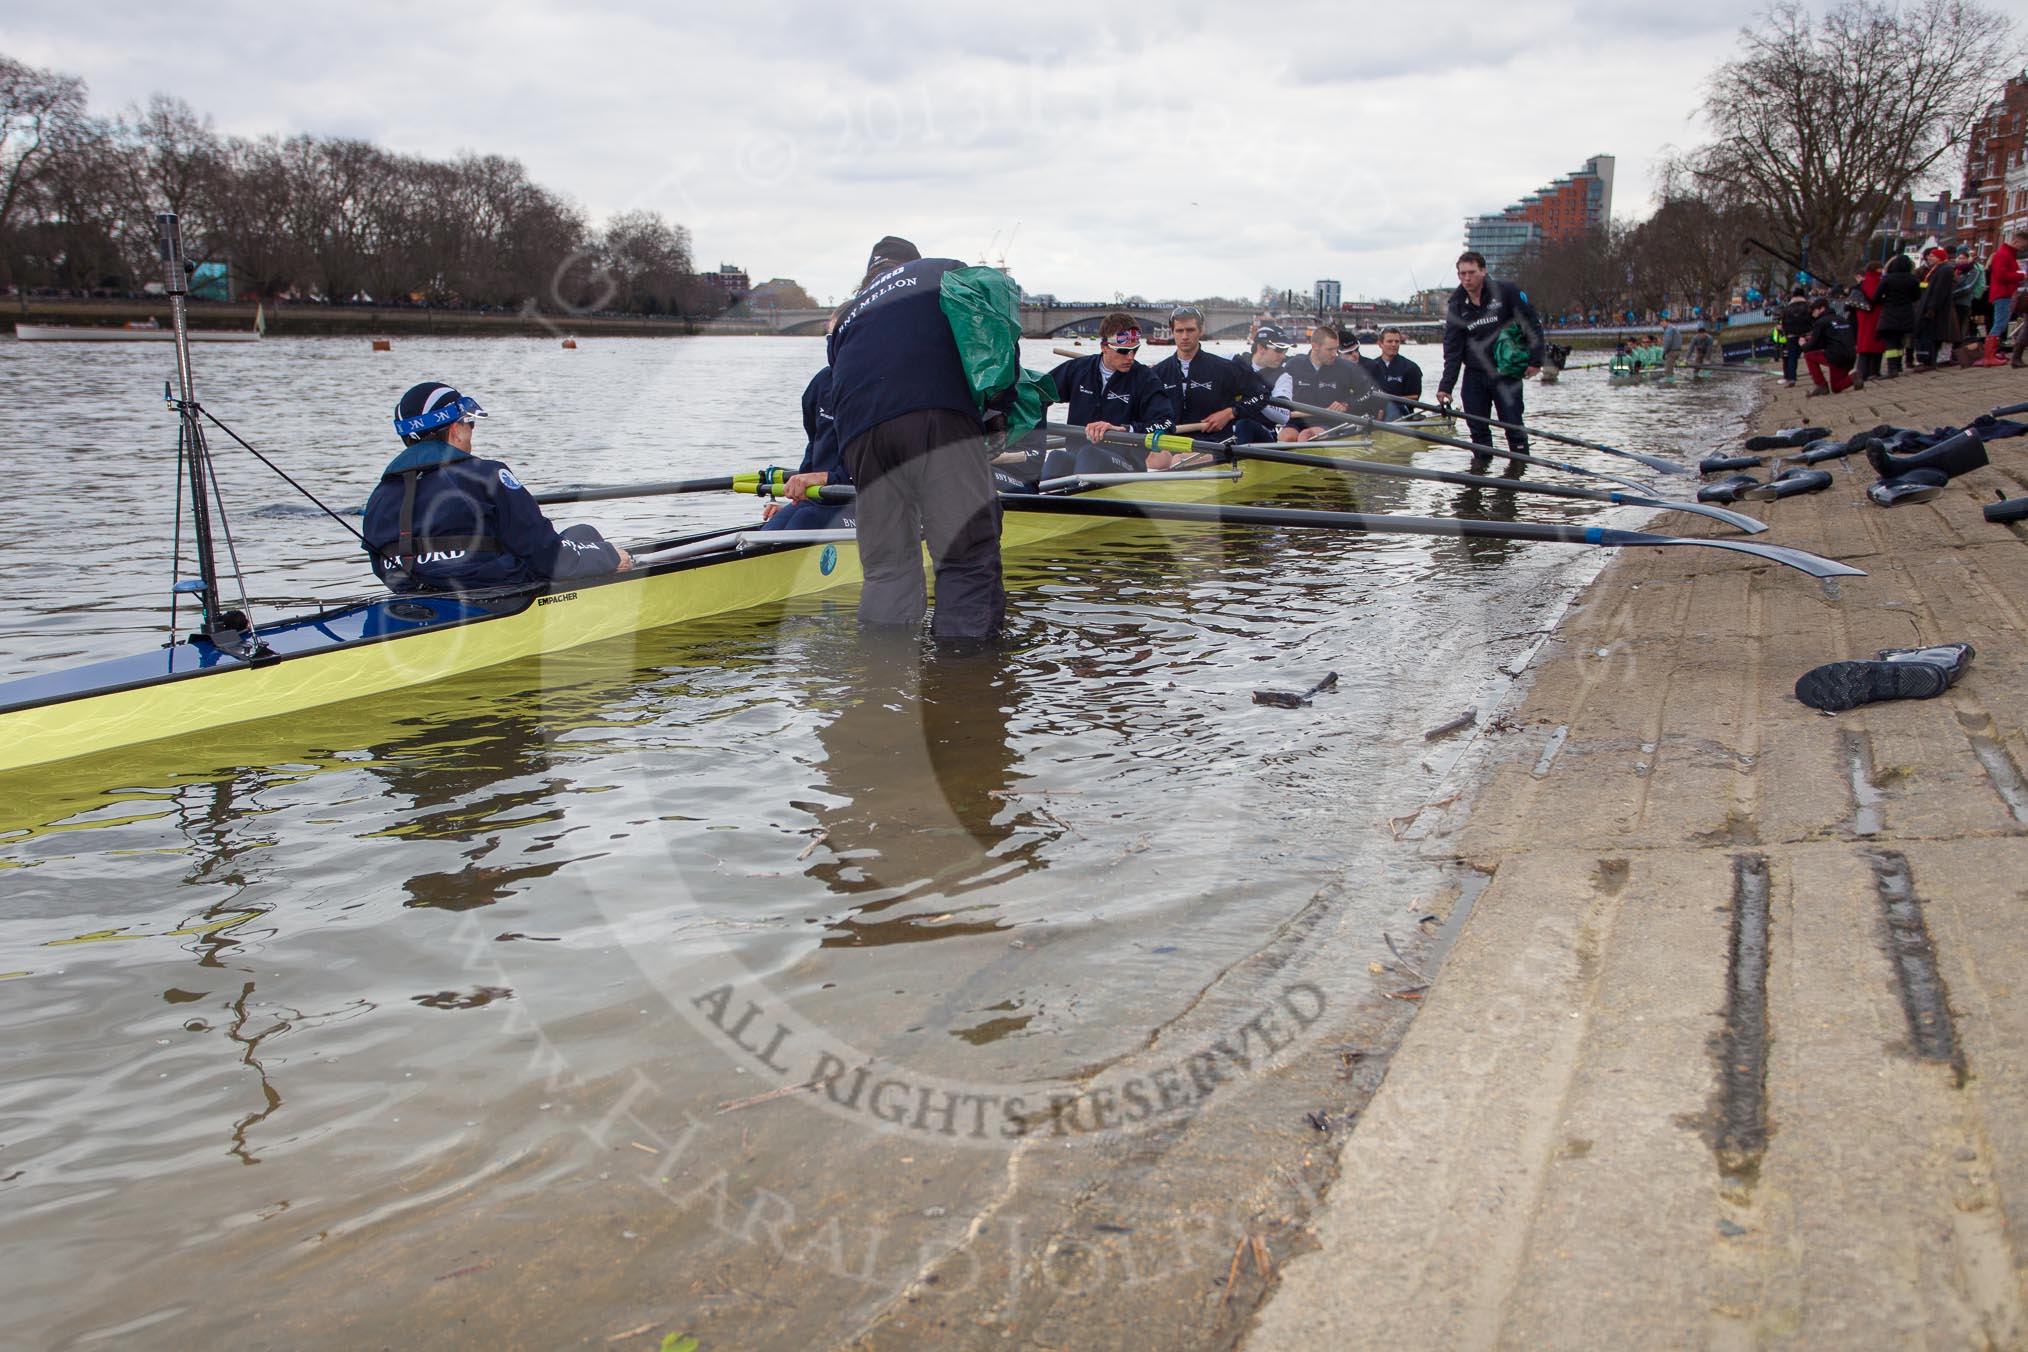 The Boat Race 2013.
Putney,
London SW15,

United Kingdom,
on 31 March 2013 at 15:48, image #165